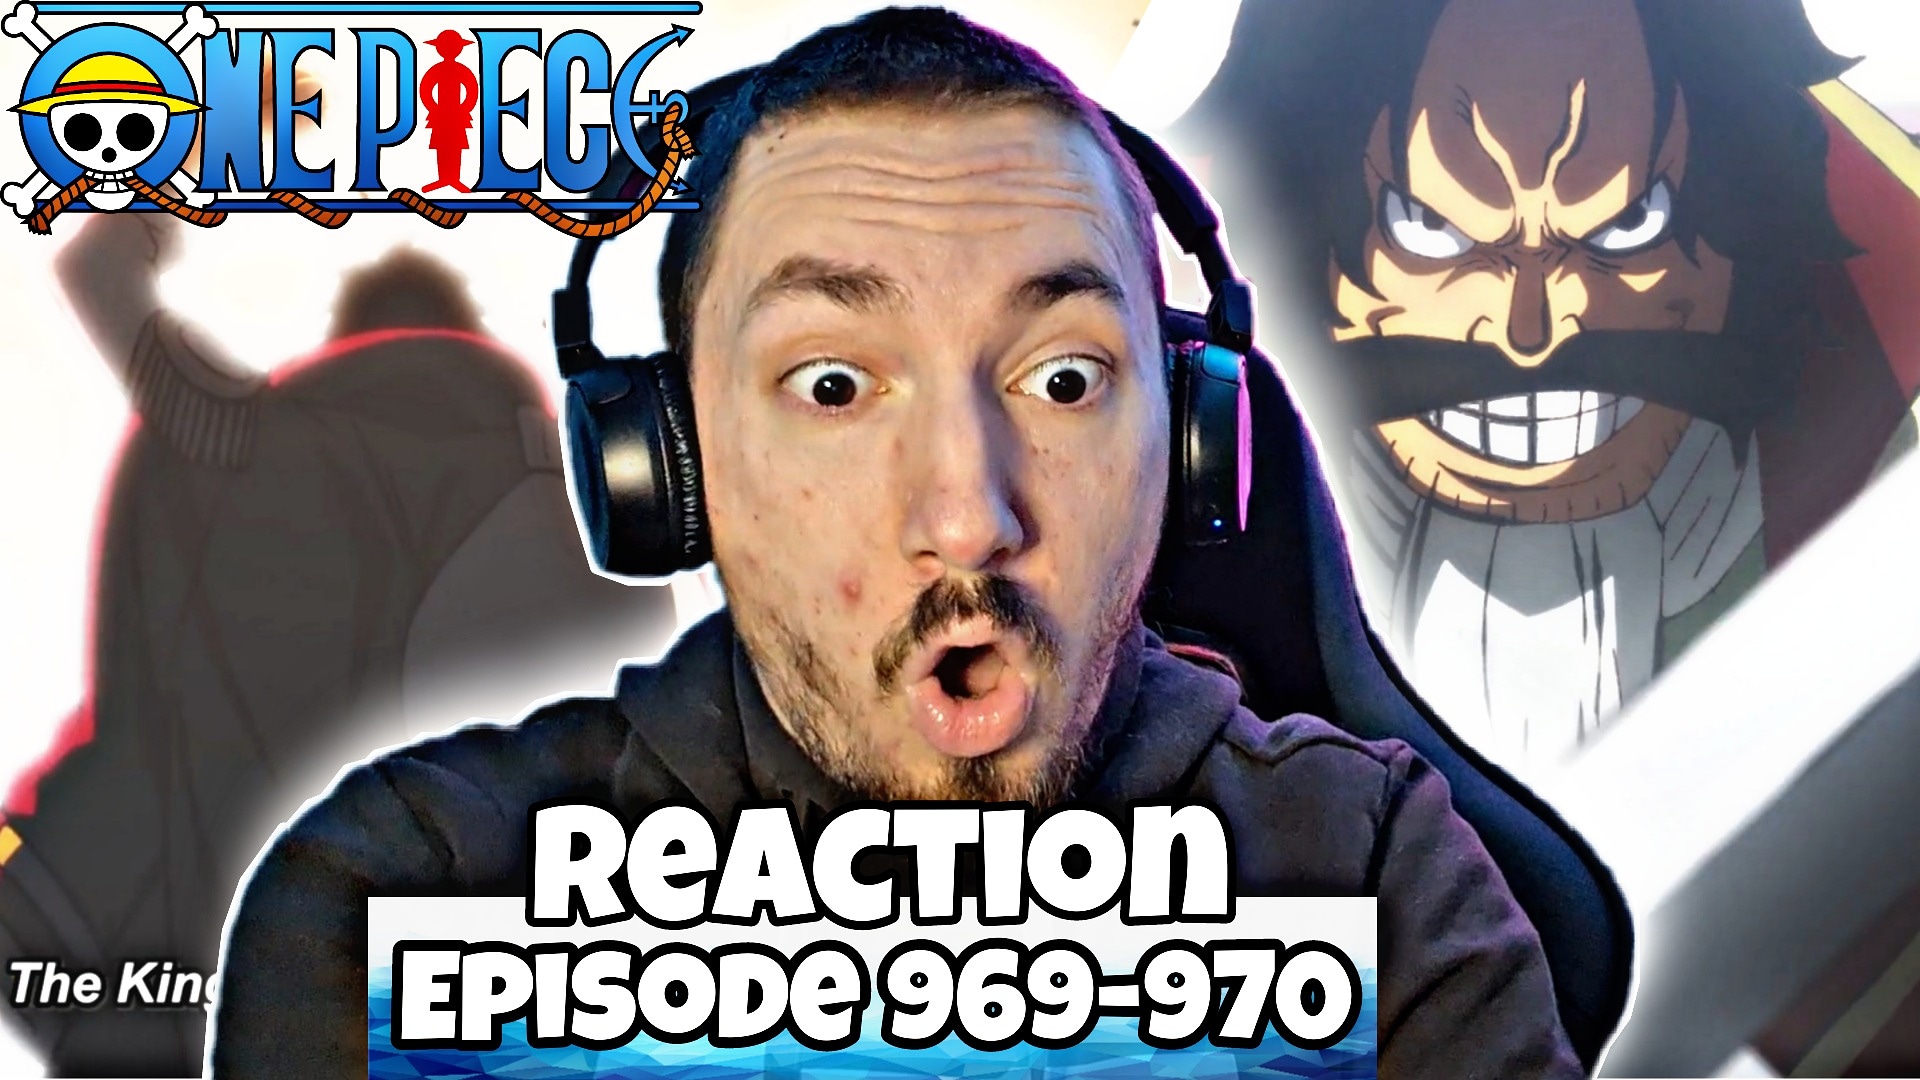 Smbro Reactions The Start Of The Great Pirate Era One Piece Episode 969 970 Reaction Oden Is Powerless T Co Eea3d2cv6z Anime Animes Weeb Otaku Onepiece Onepiece969 Onepiece970 Onepieceedit Onepiecefanart